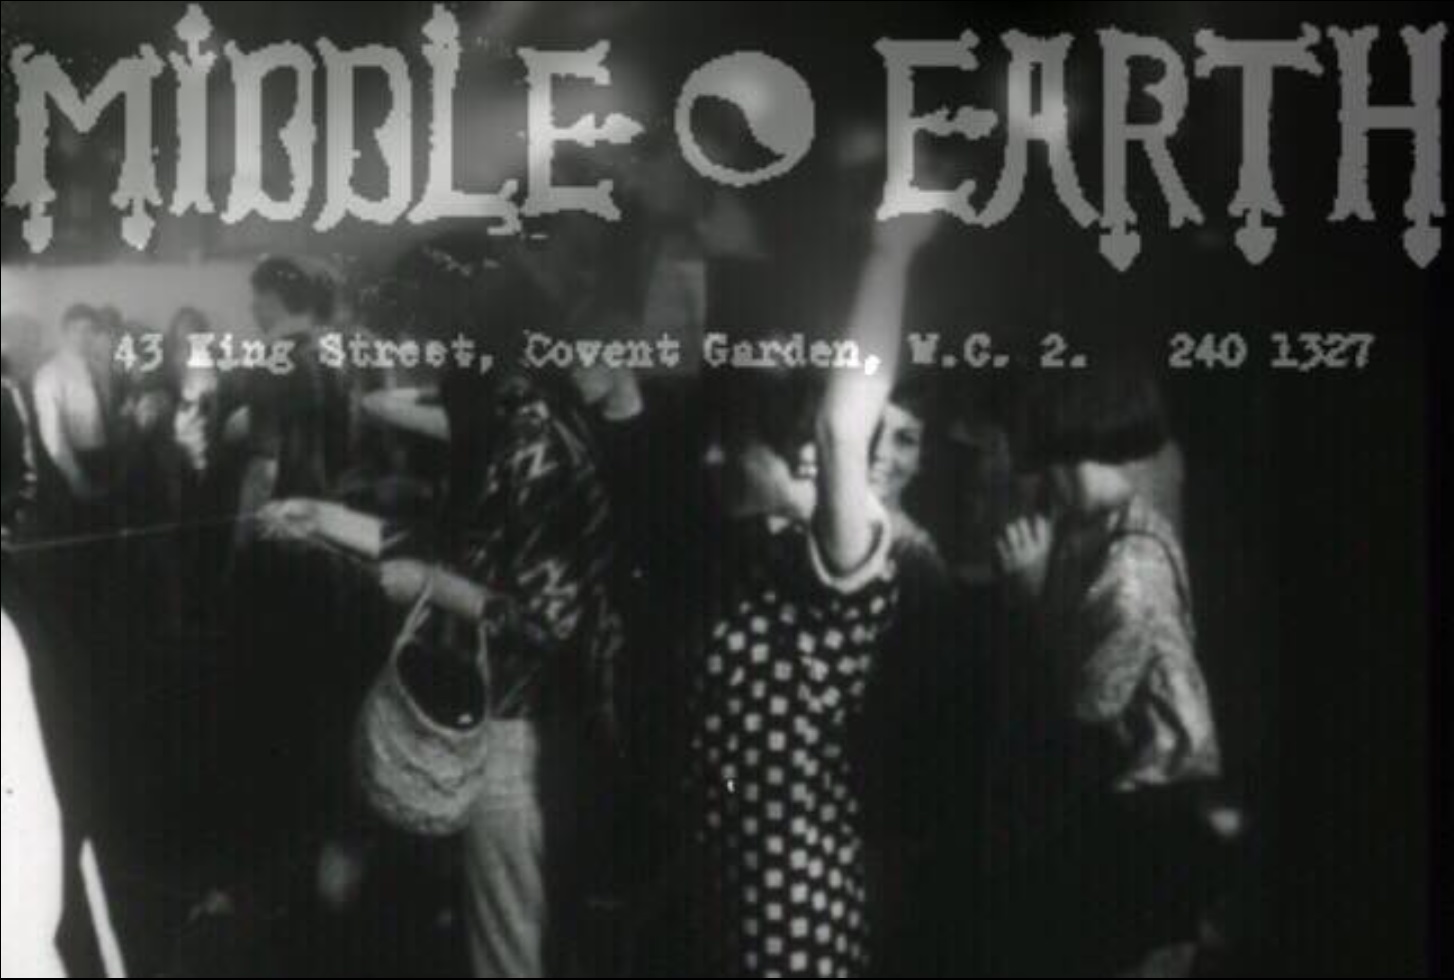 Middle Earth Club Covent Garden London